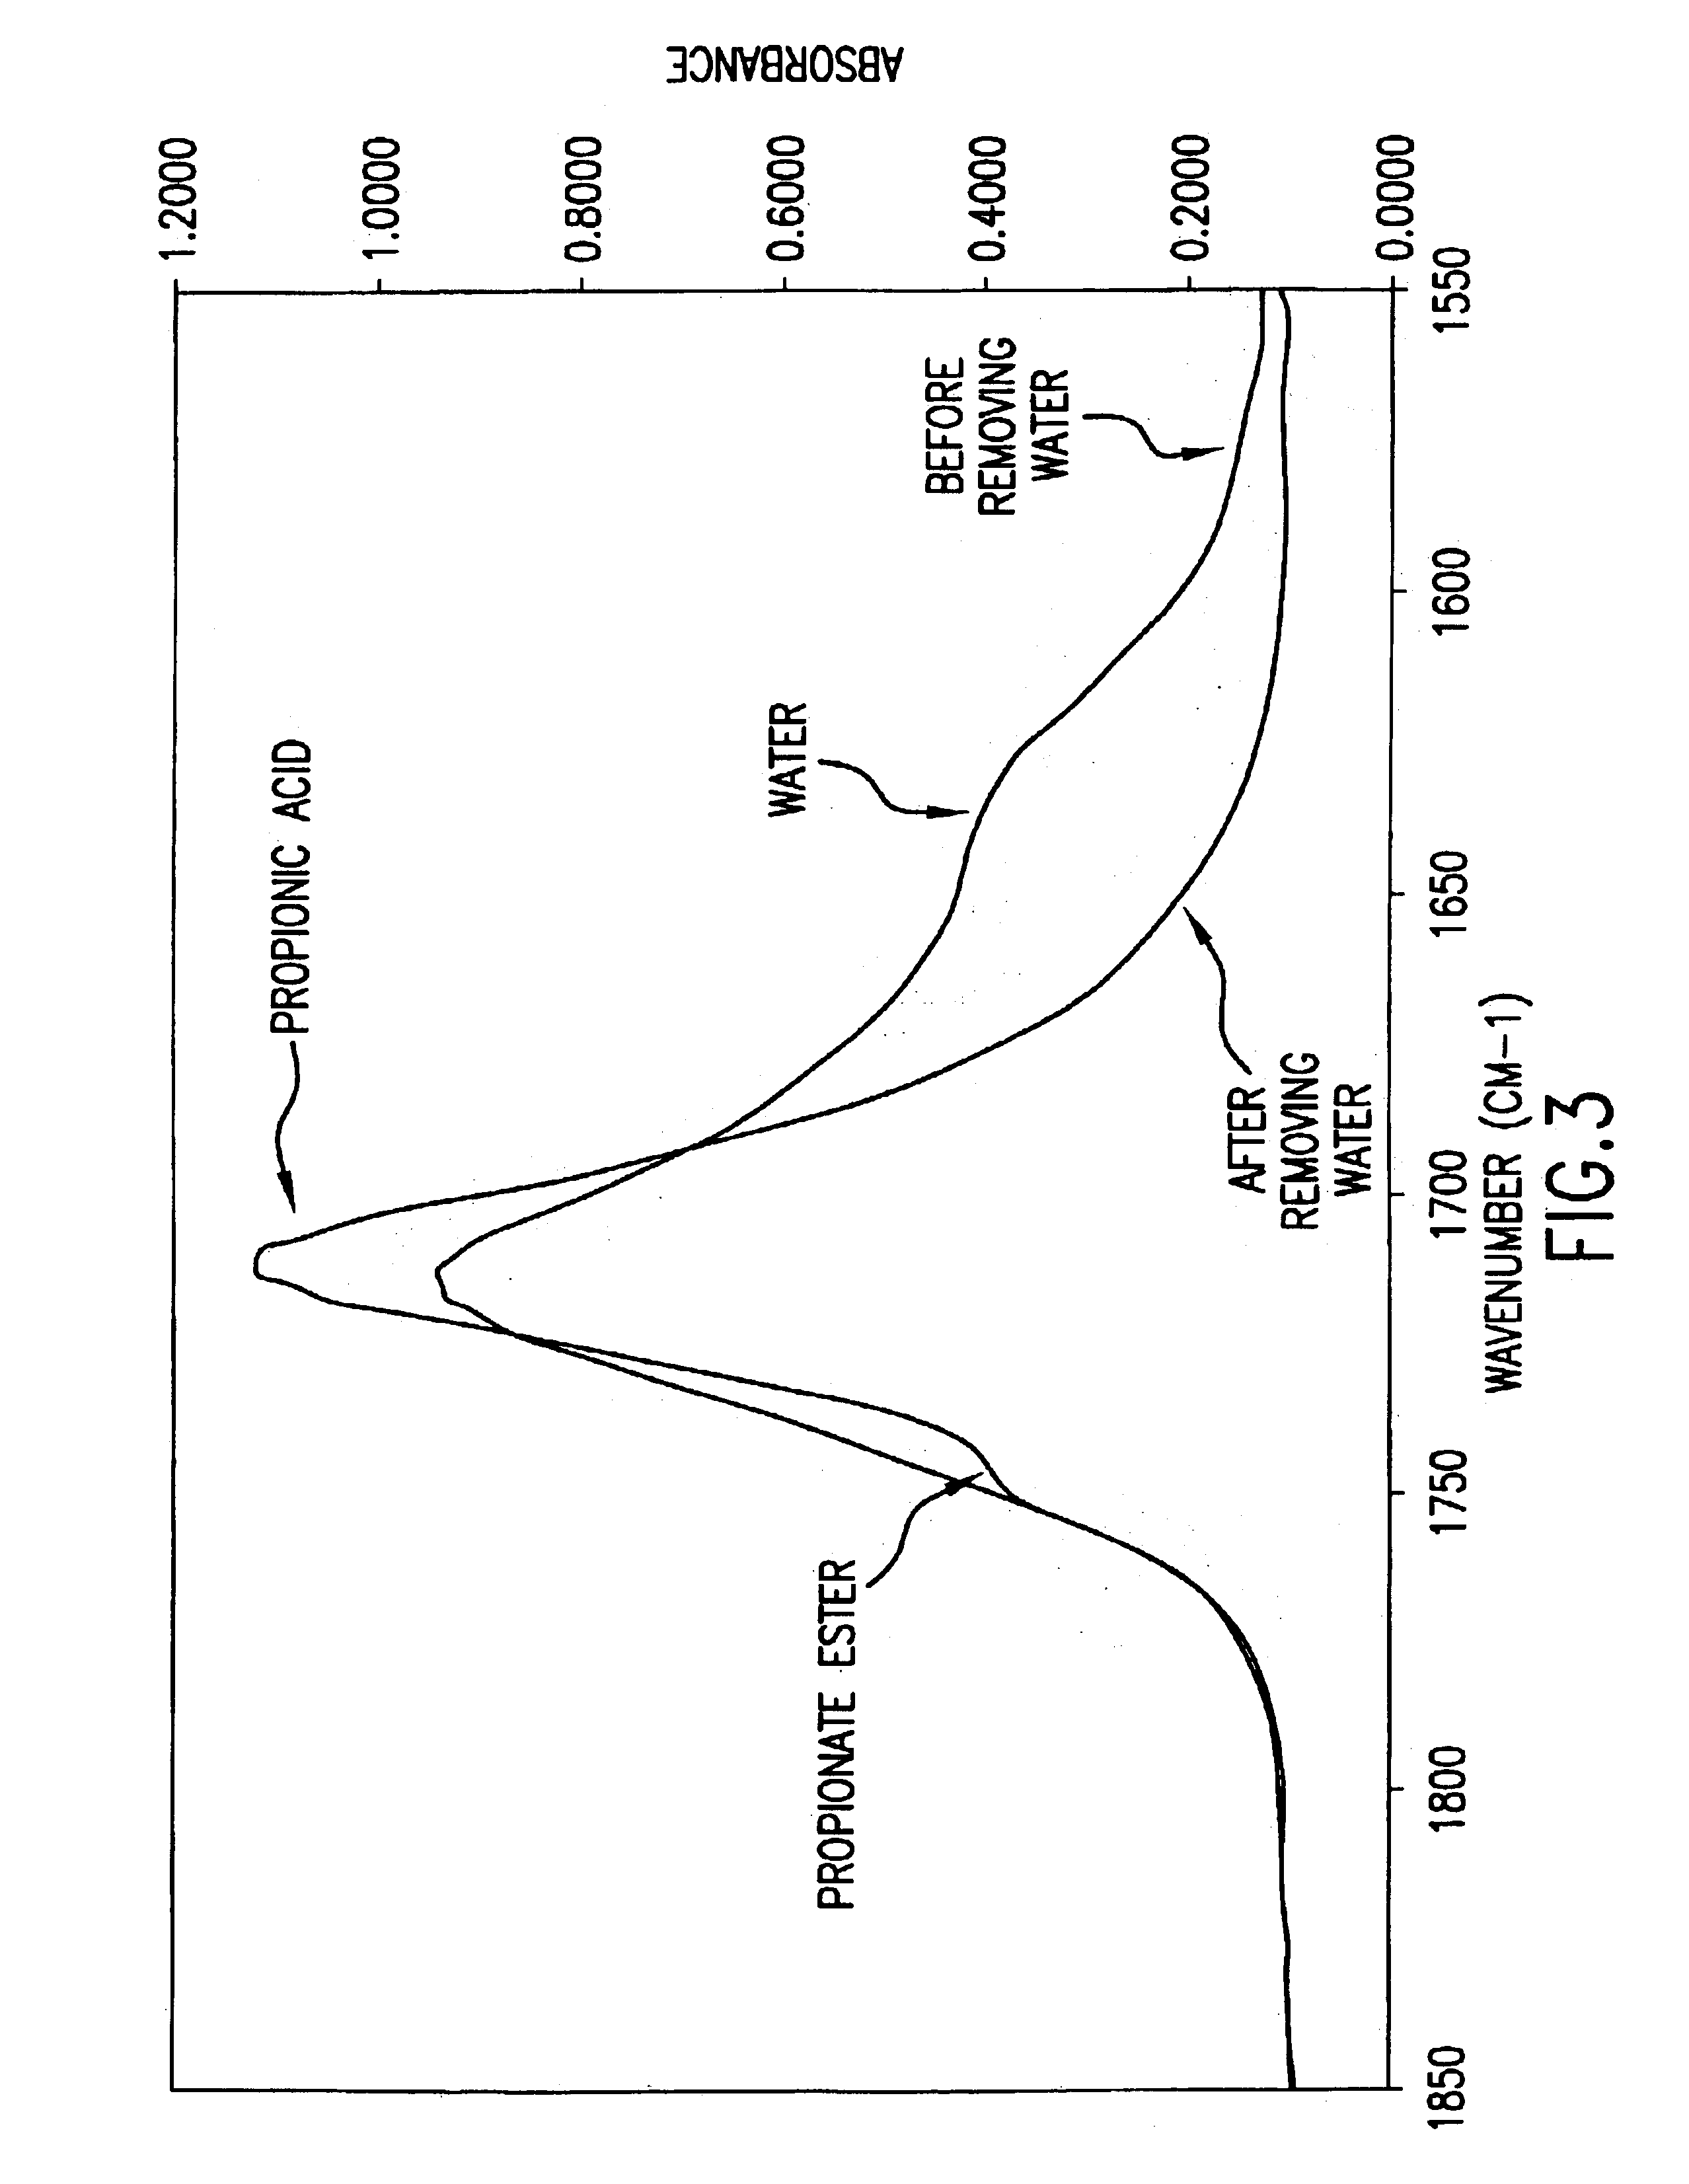 Carbohydrate esters and polyol esters as plasticizers for polymers, compositions and articles including such plasticizers and methods of using the same